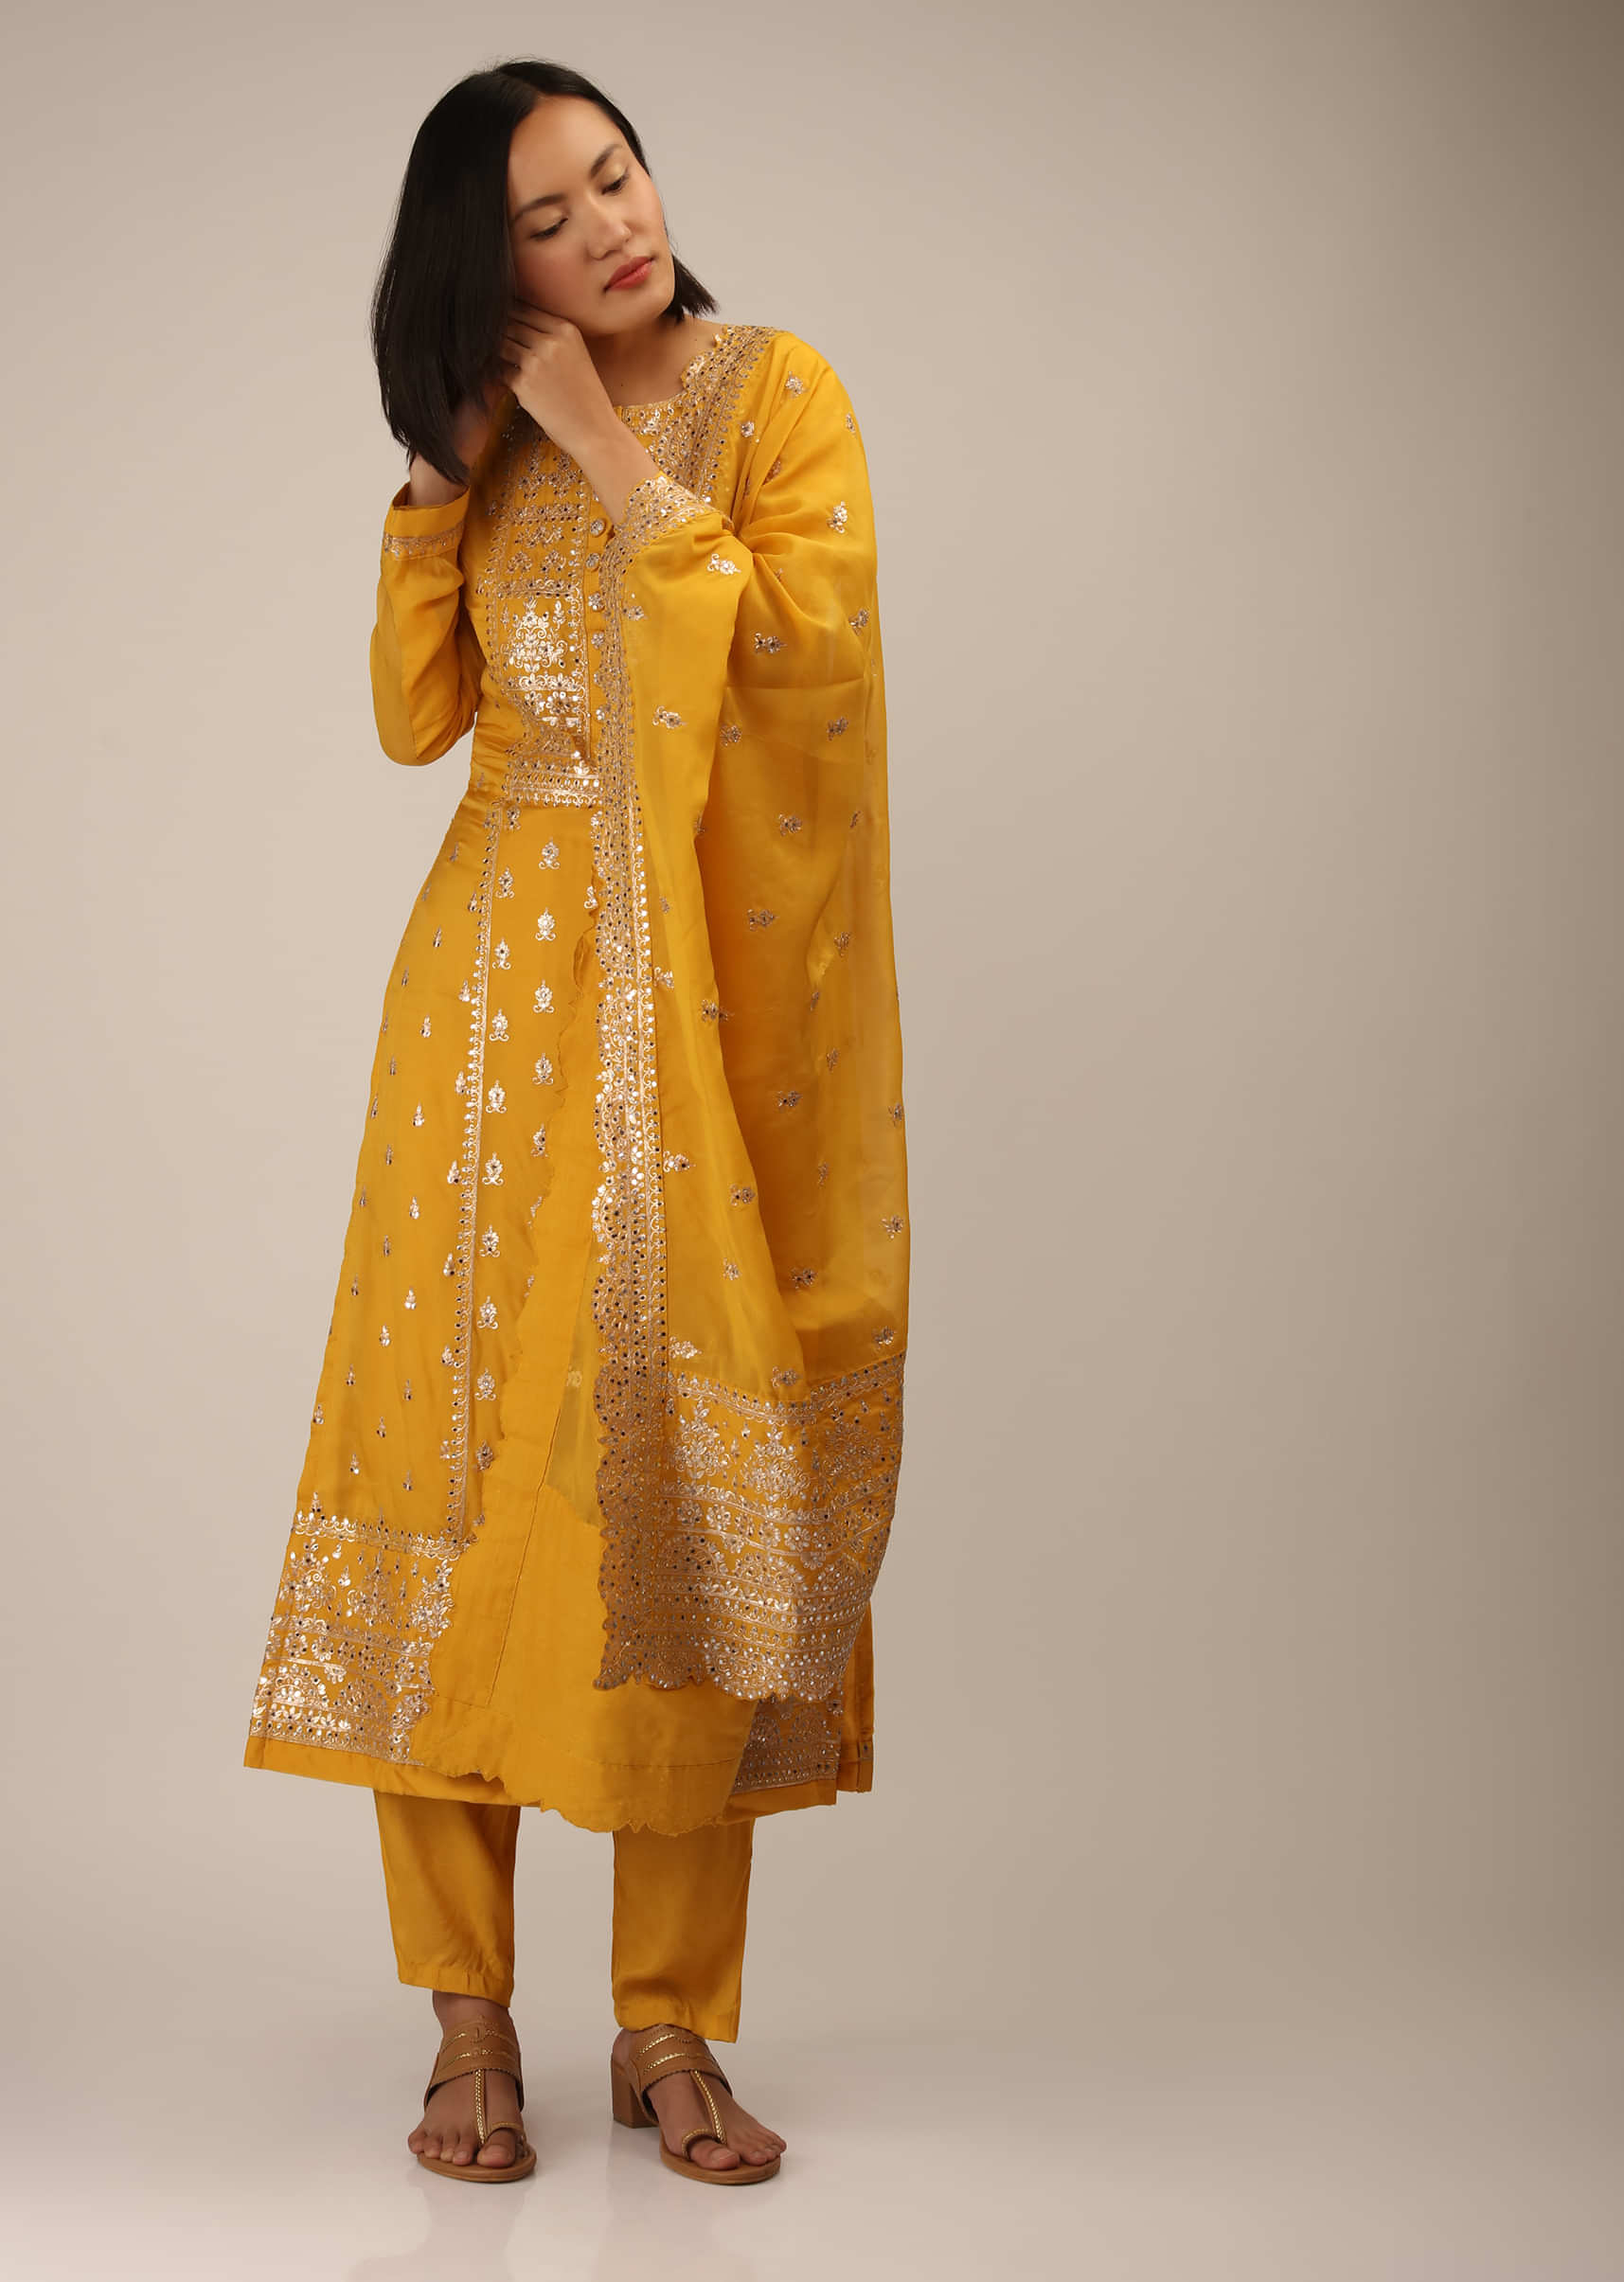 Golden Yellow Straight Cut Suit In Organza Silk With Zari And Mirror Work And Full Sleeves